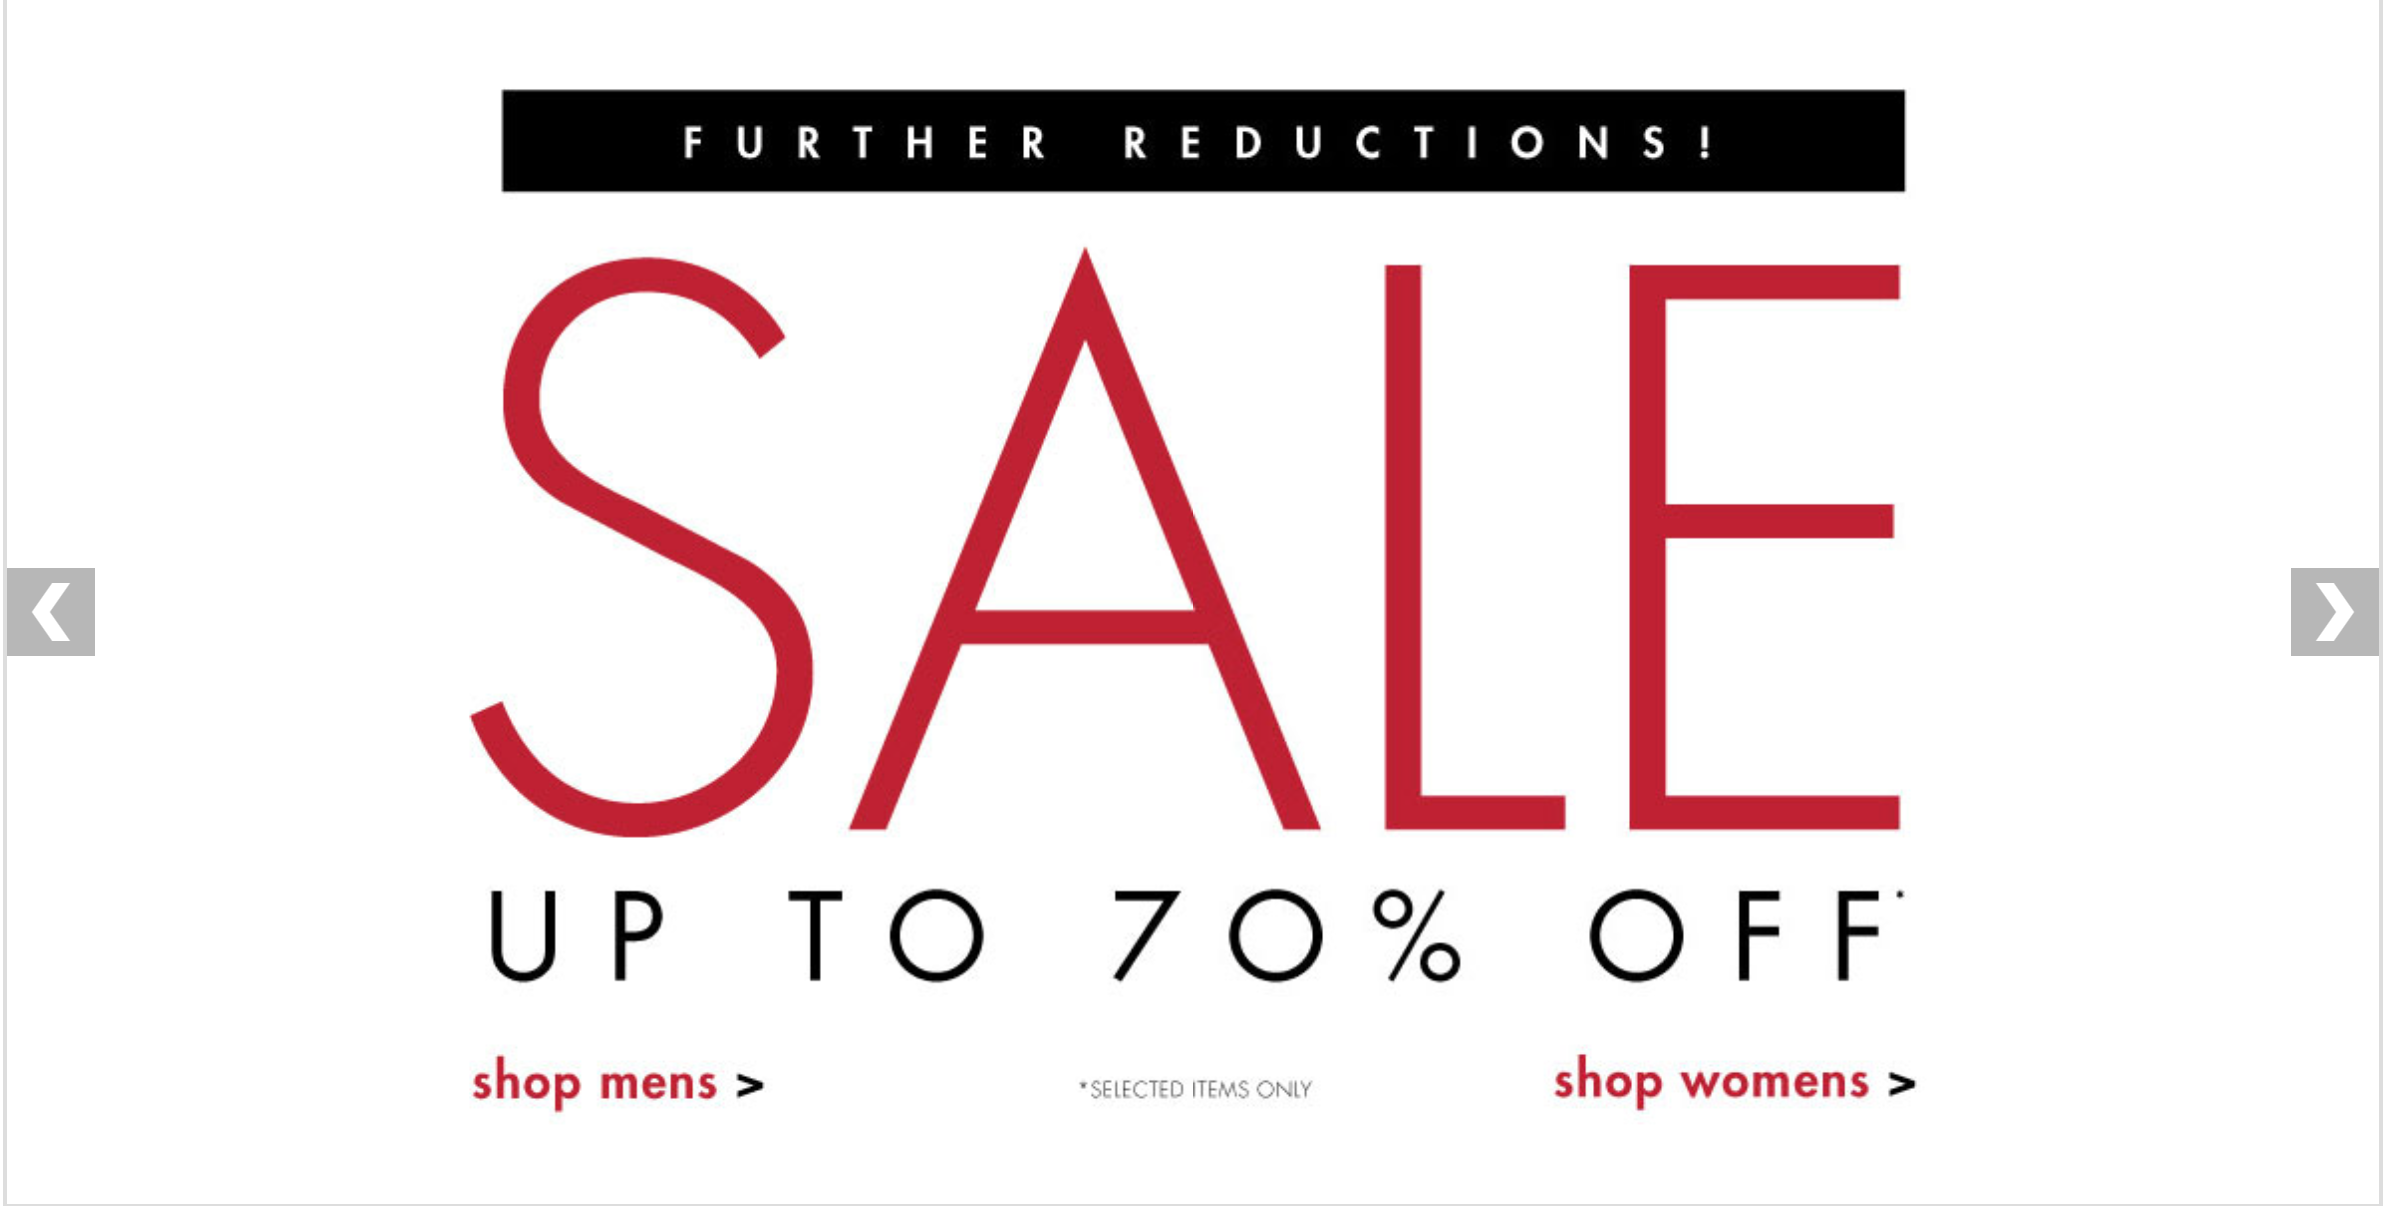 USC: sale up to 70% off